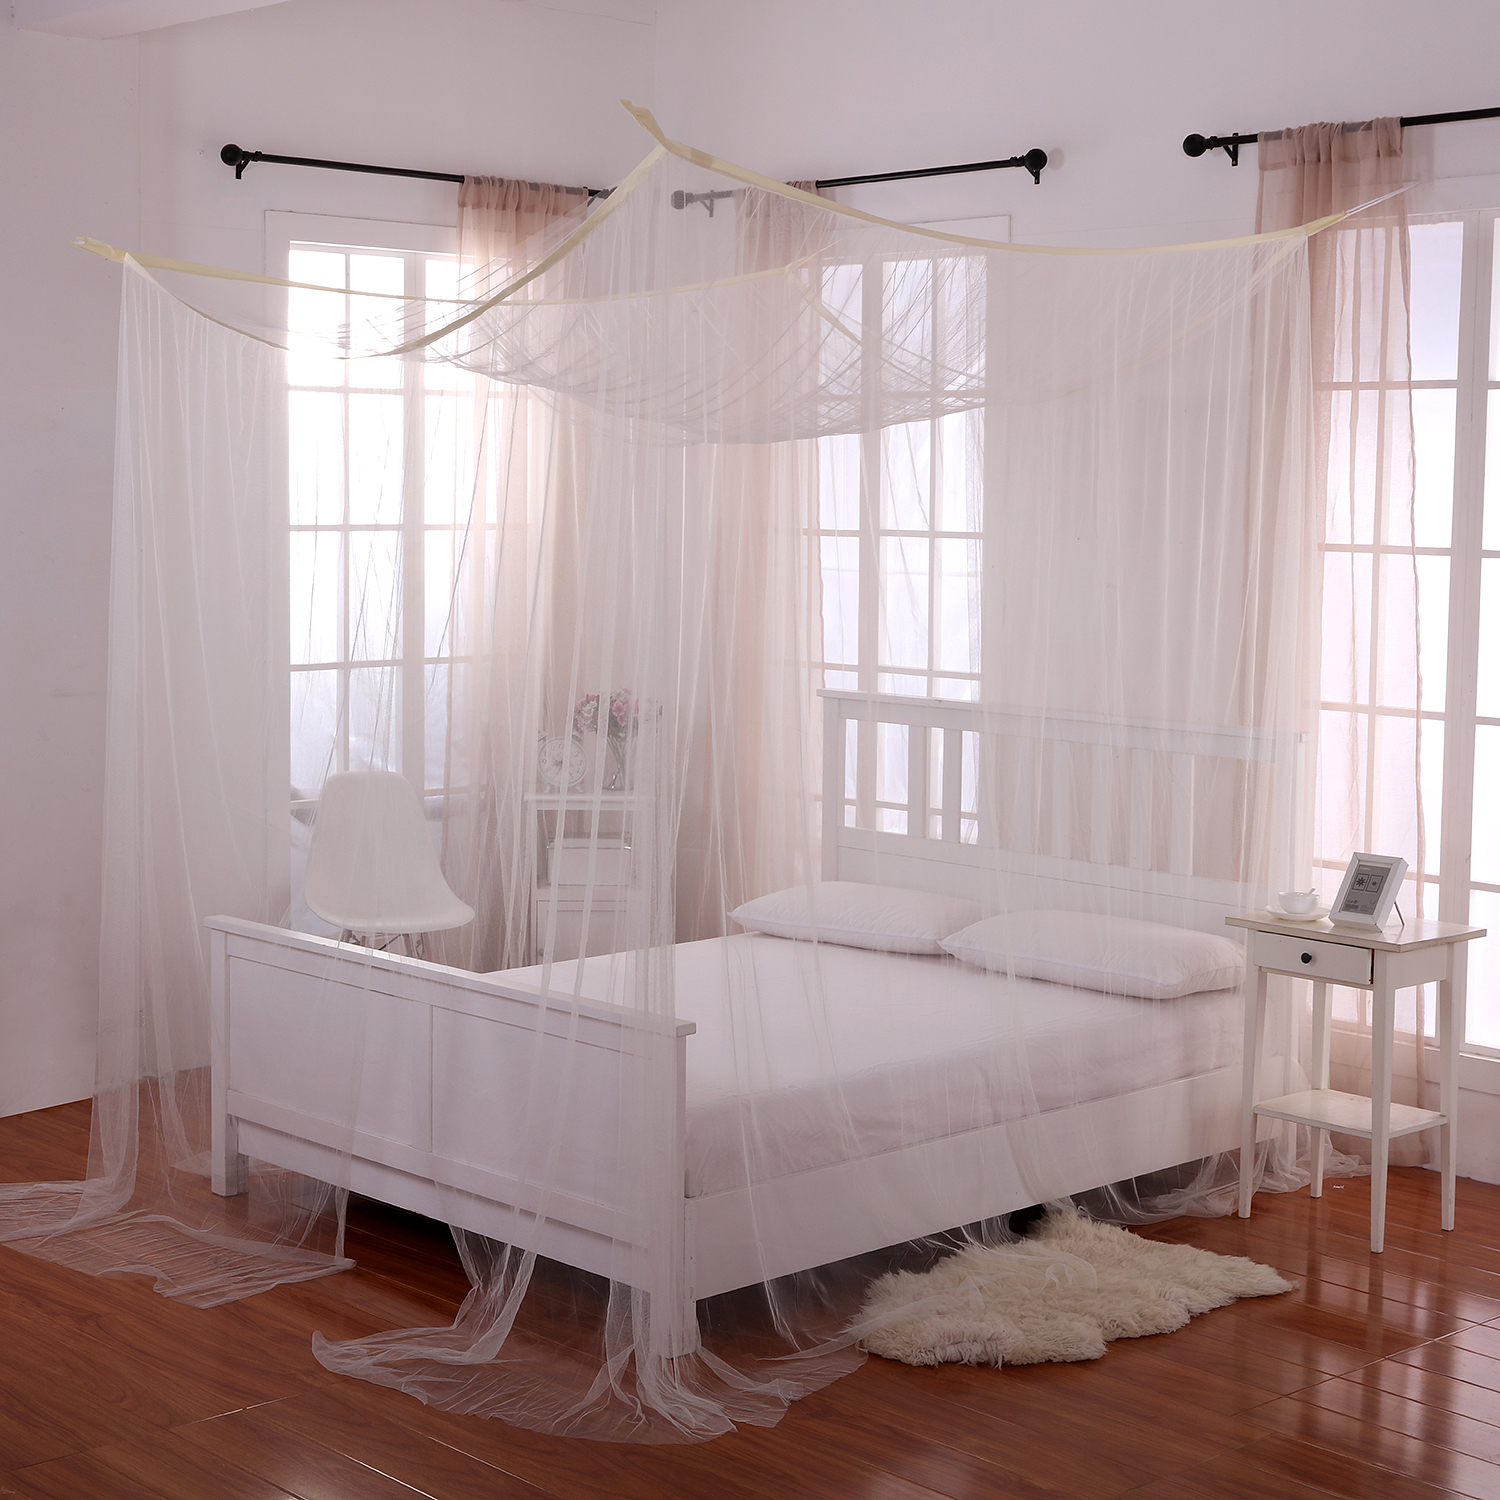 Casablanca Palace 4-Post Bed Sheer Panel Canopy